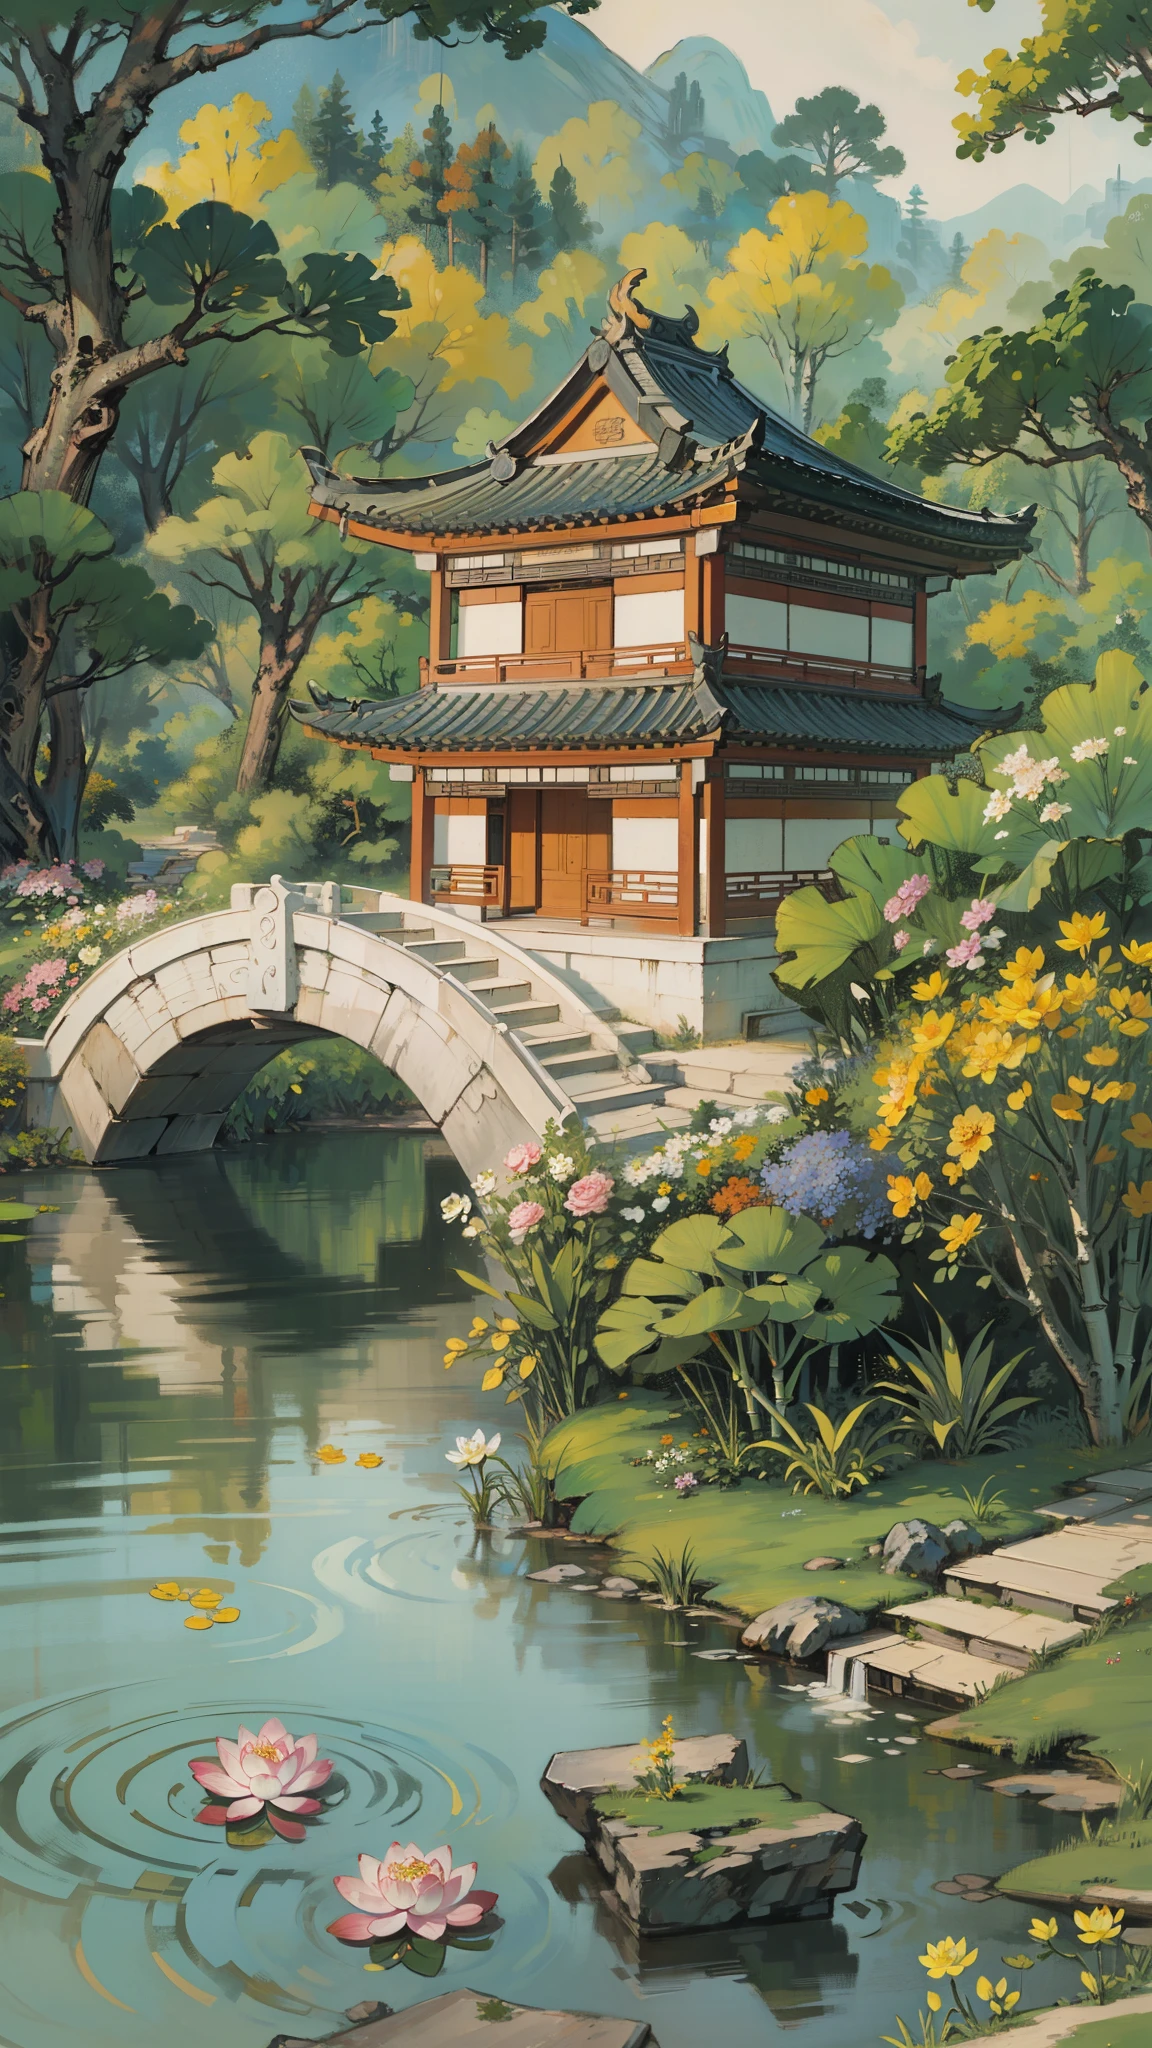 ((best quality, masterpiece: 1.2)), CG, 8k, intricate details, perspective, (no one around), (Ancient Chinese gardens), pond filled with lotus flowers, rock, flowers, bamboo forest, Fall, wooded areas, Small bridge across gurgling stream, detailed foliage and flowers, (the sun shines, Sparkling waves), Peaceful and tranquil atmosphere, ((Soft and elegant colors)), ((Finely crafted compositions))